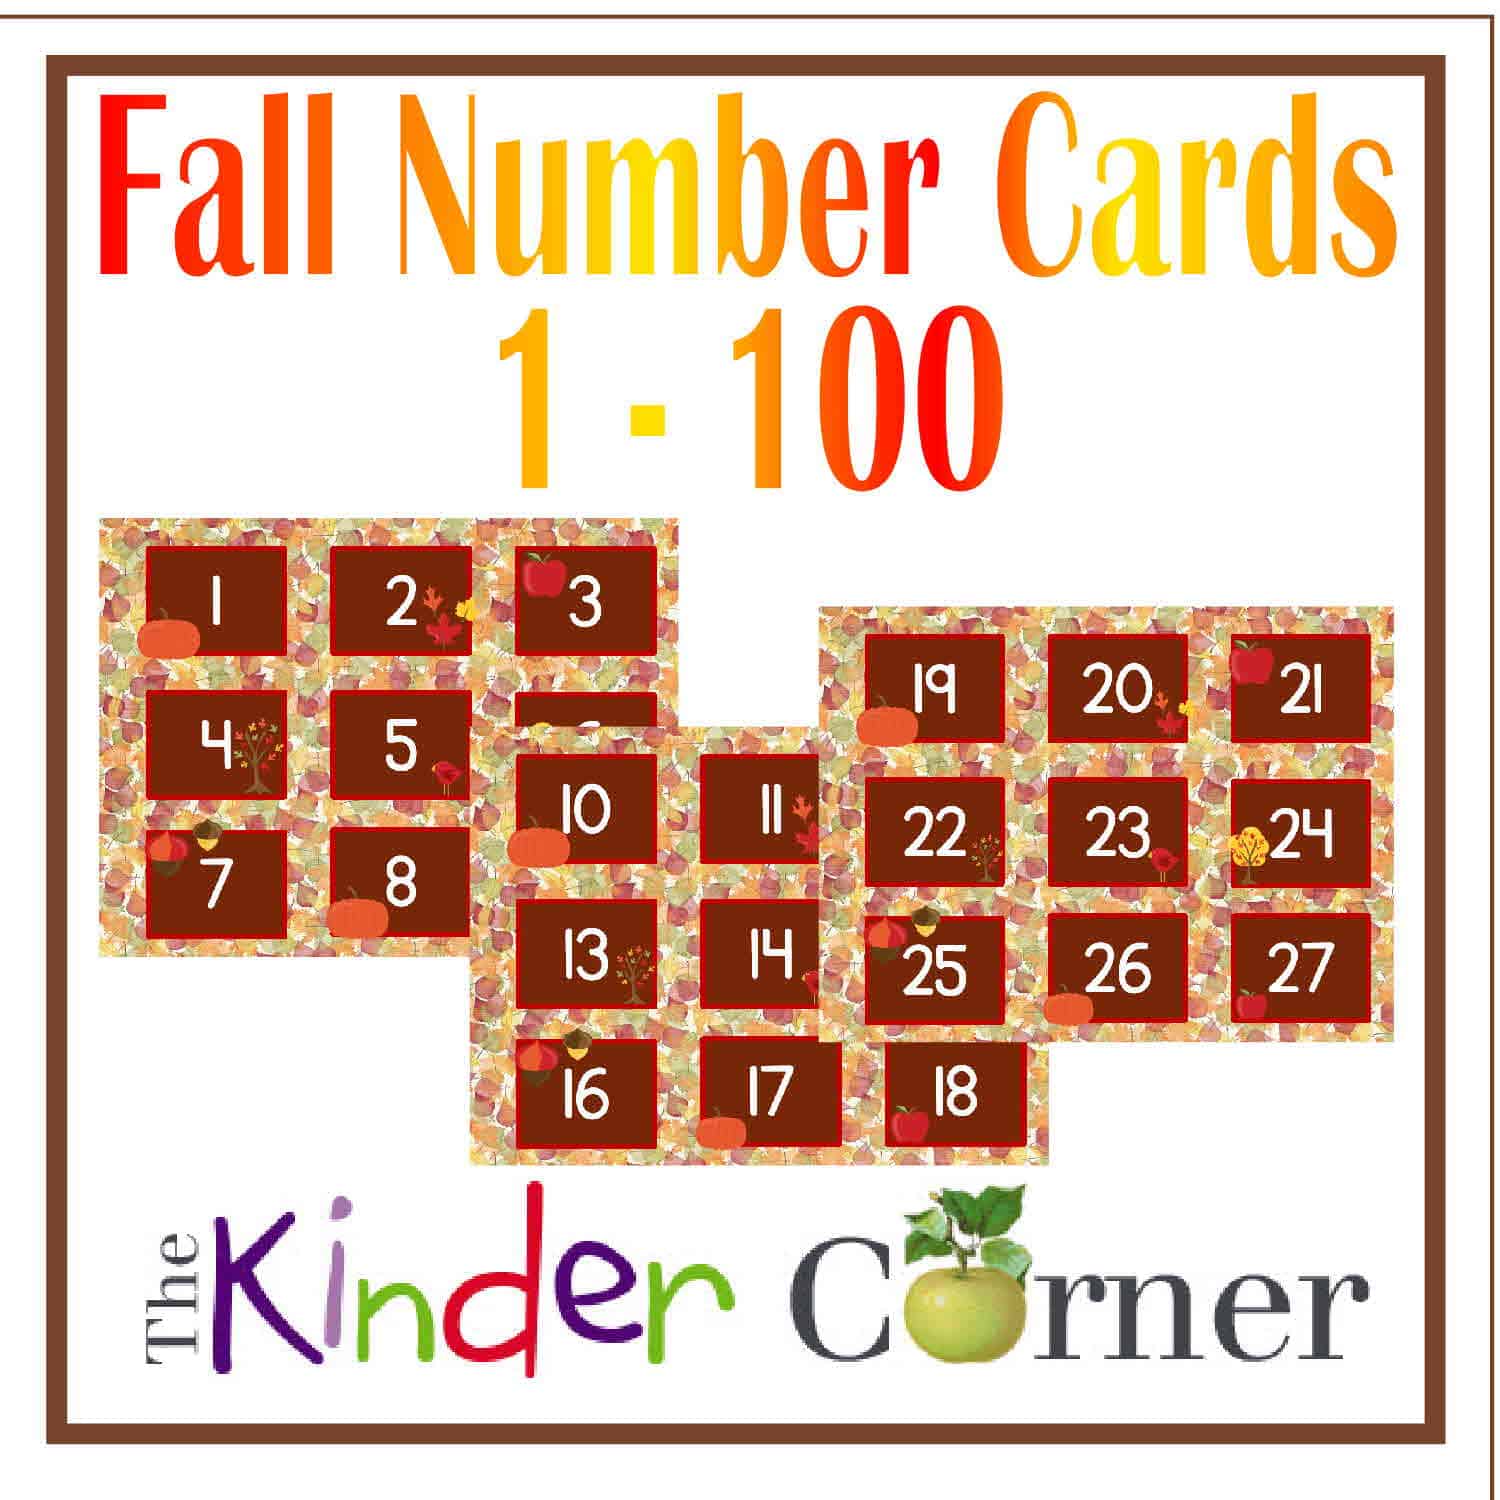 Fall rules. Numbers 1-100 Cards. Number Cards. Корнер Киндер Corner. Falling number.